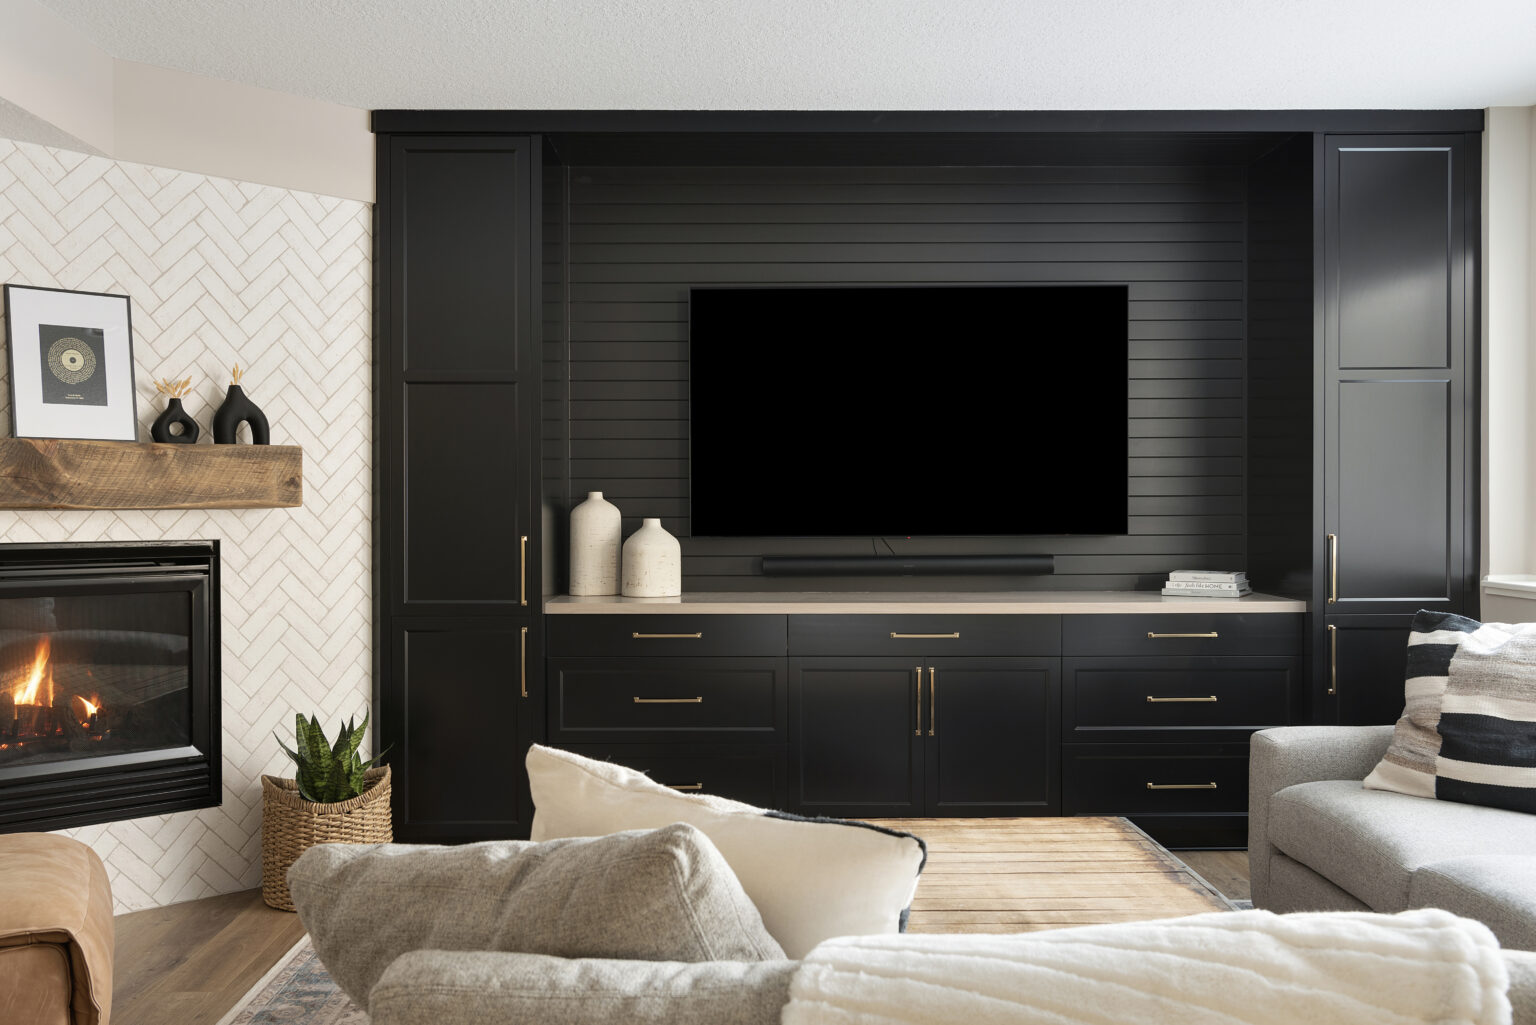 Home theater with a TV against a black wall, with white accents.